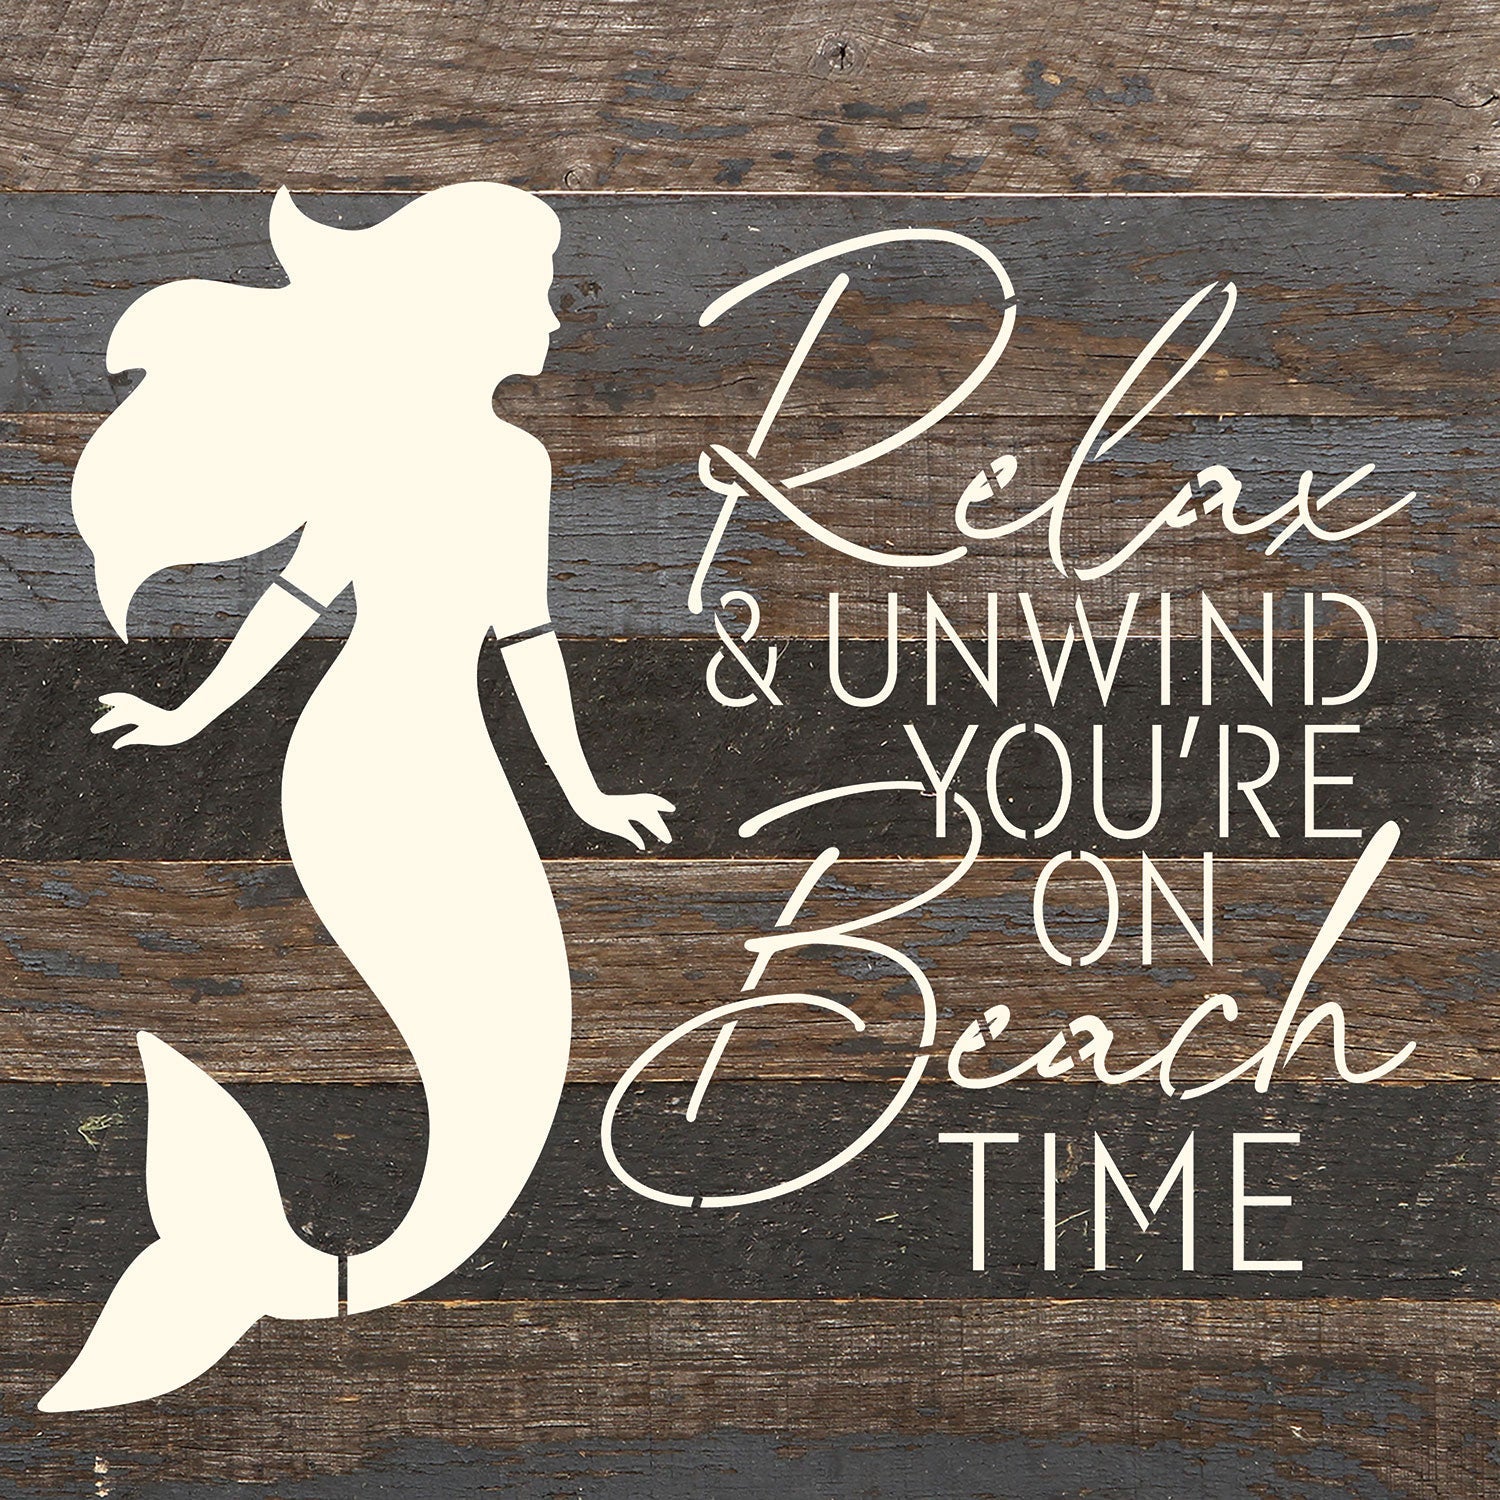 Relax & unwind. YouÕre on beach time / 10x10 Reclaimed Wood Wall Decor